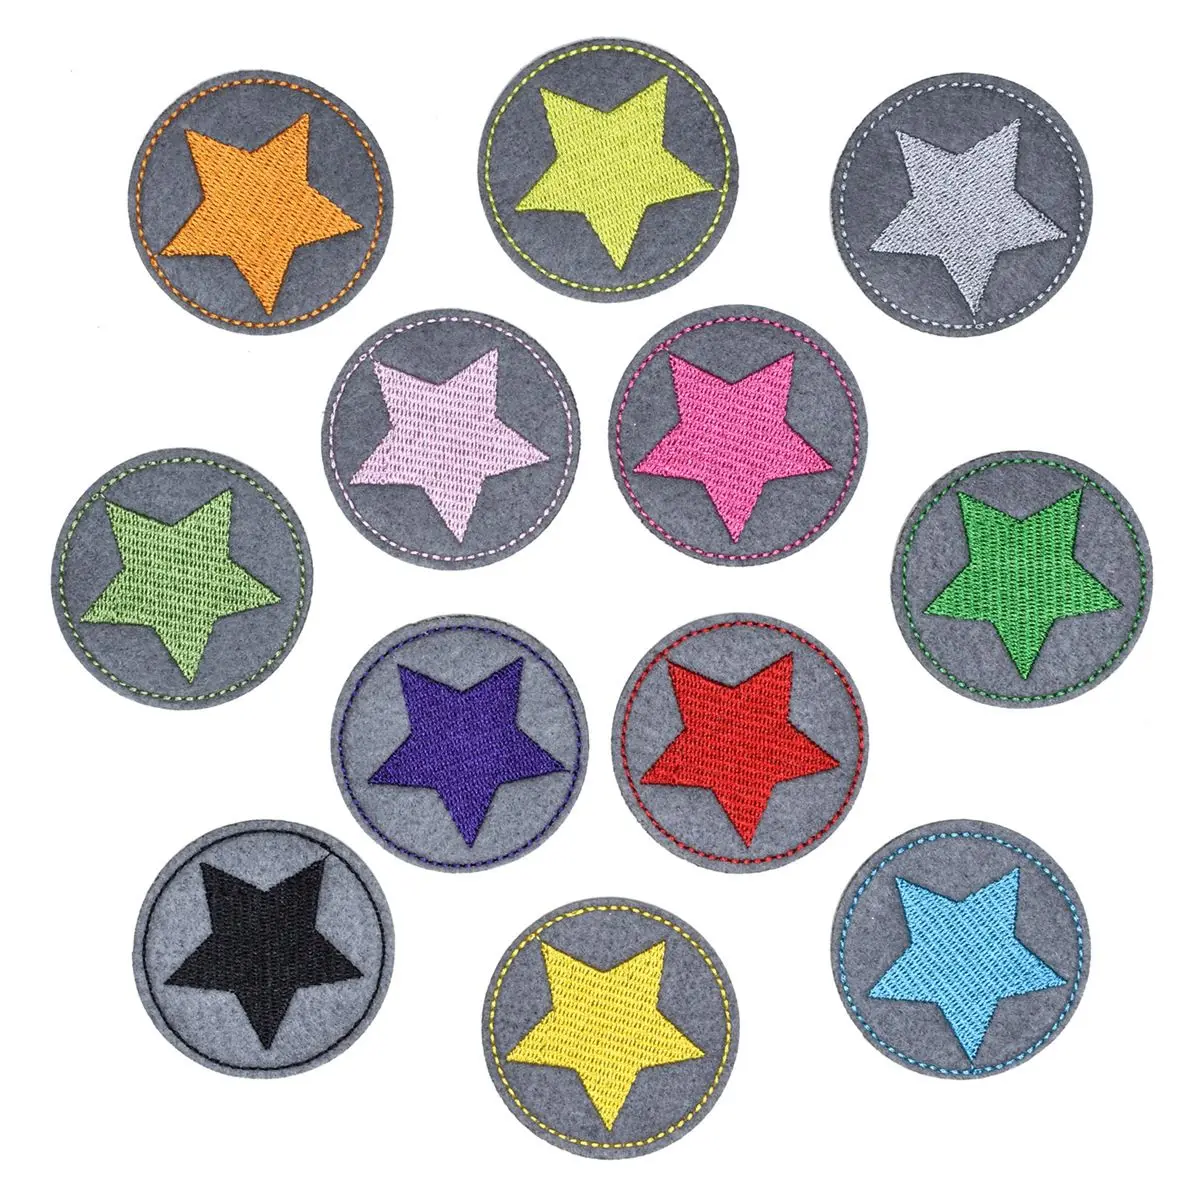 

12Pcs/set Round five-pointed star Series Ironing Embroidered Patches For on Hat Jeans Clothes Sticker Patch DIY Applique Badge